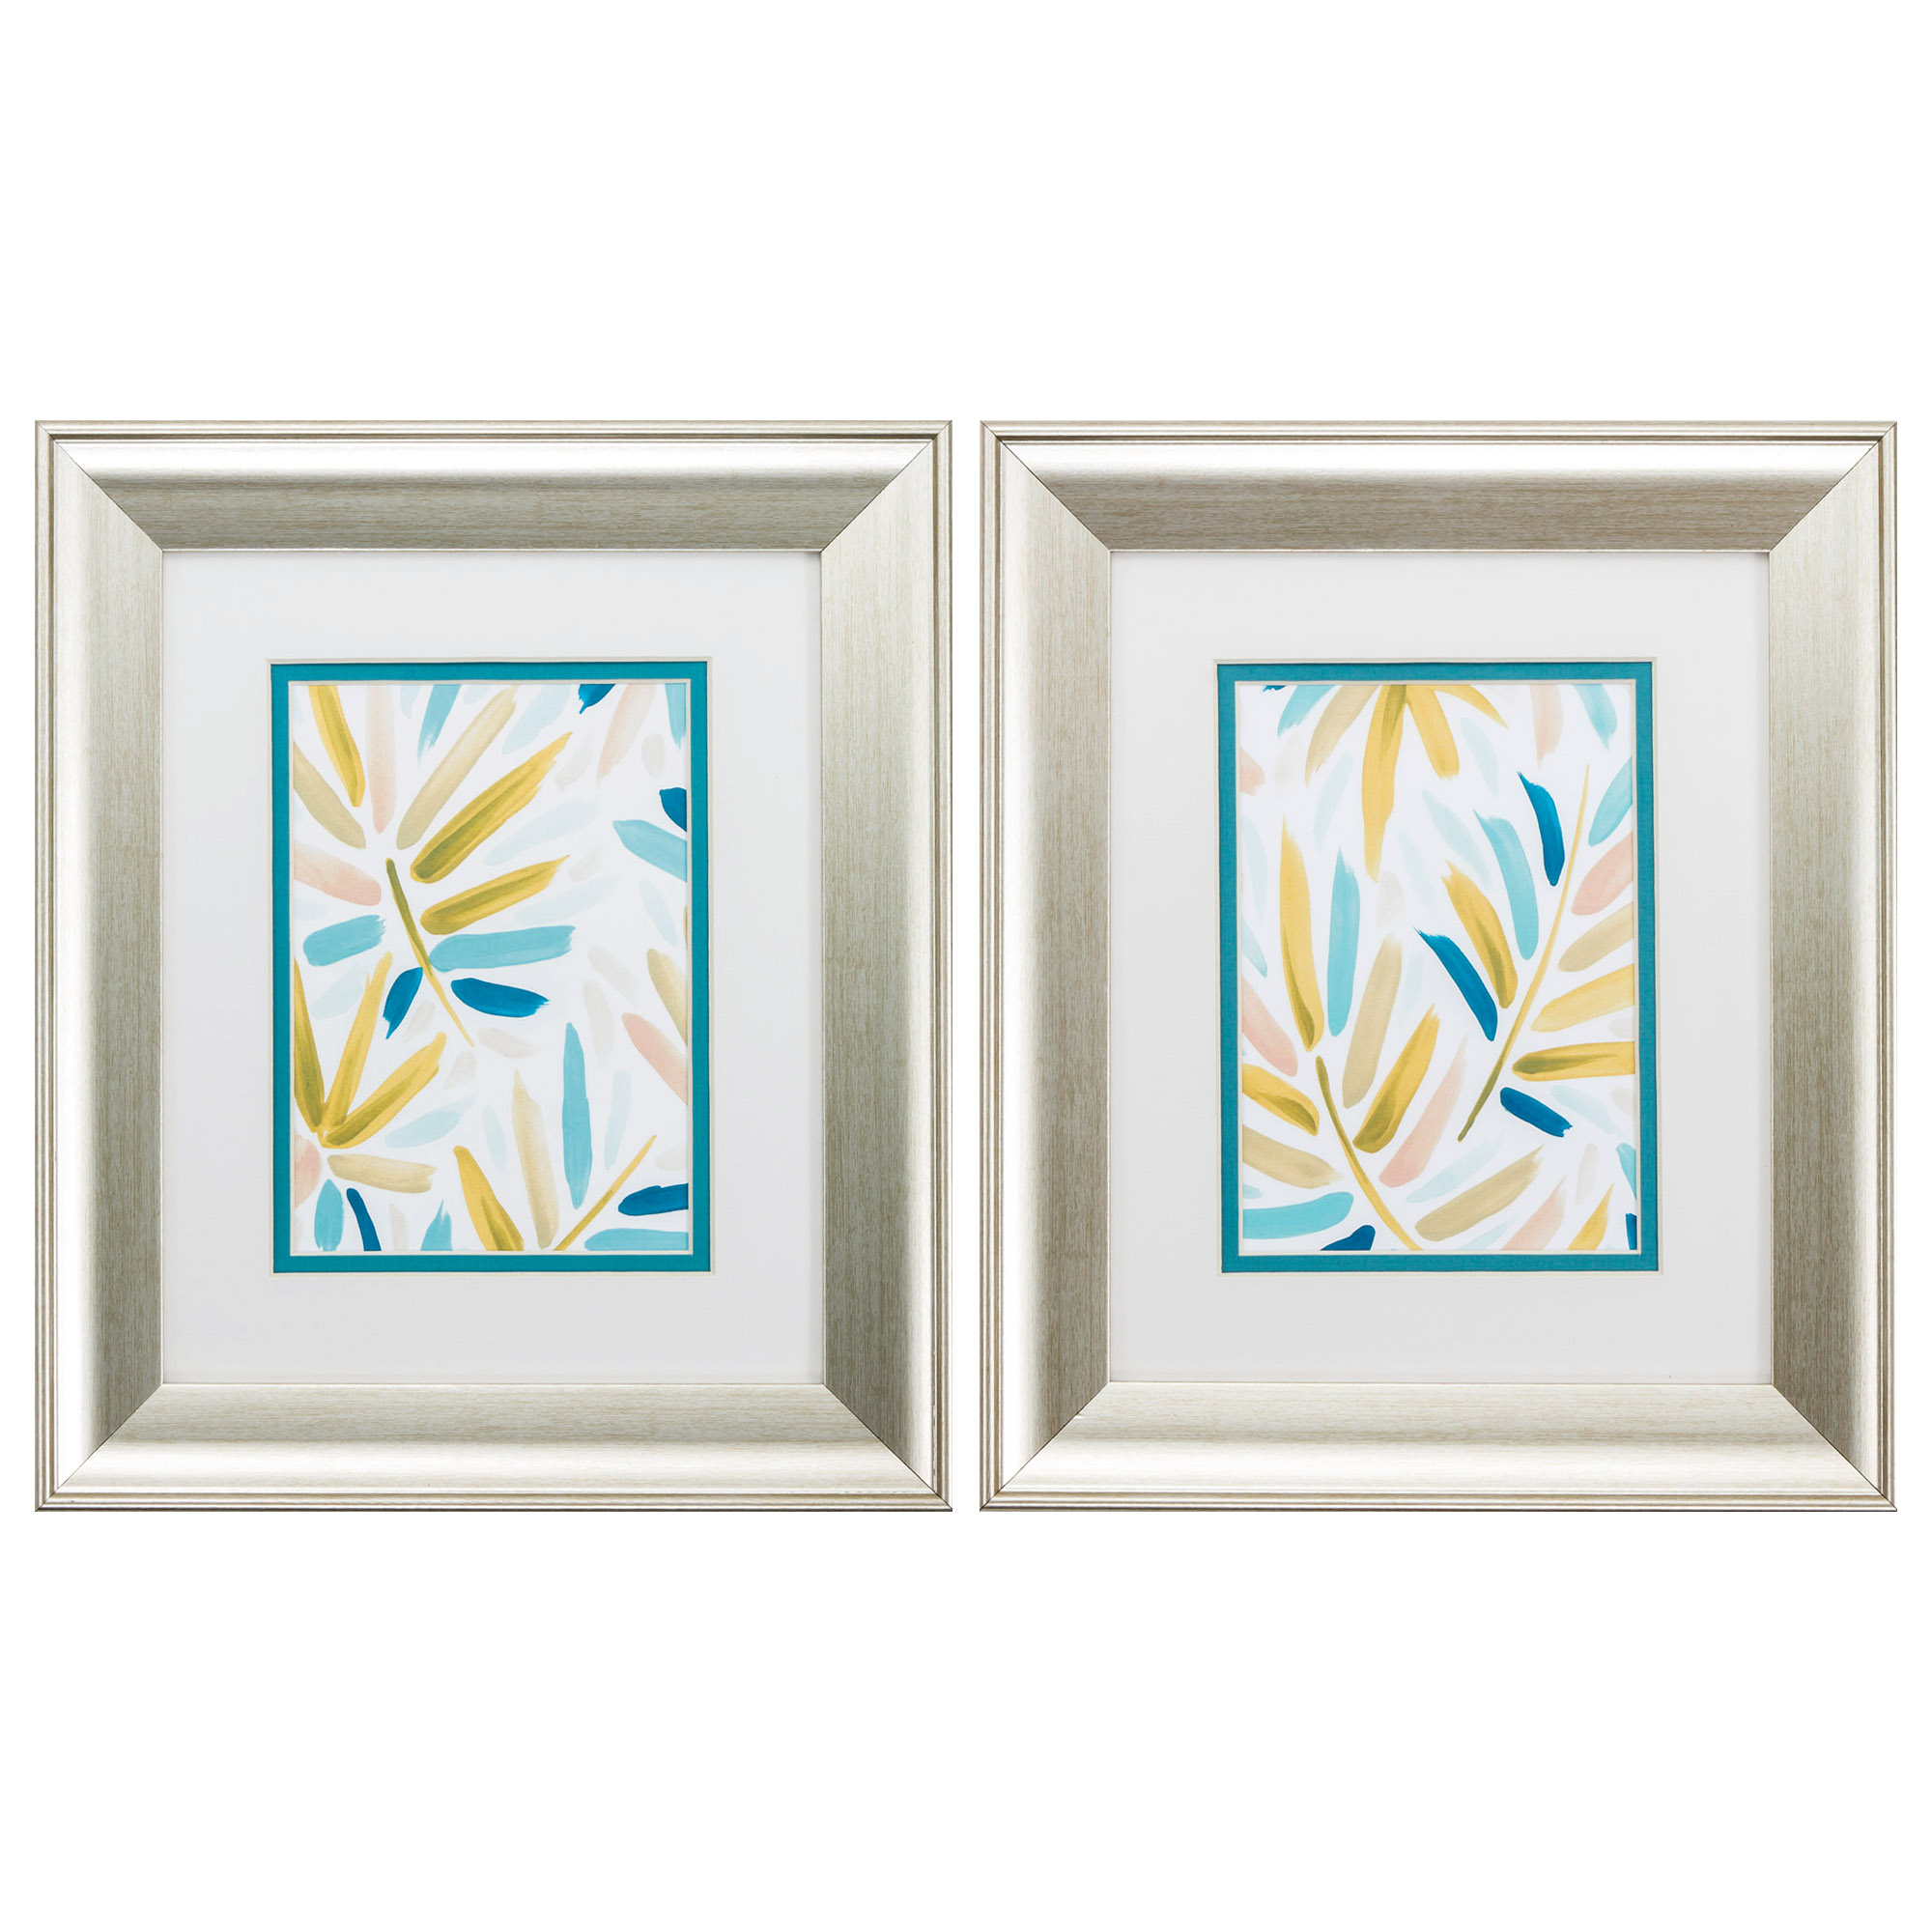 11" X 13" Brushed Silver Frame Calypso Confetti (Set of 2)